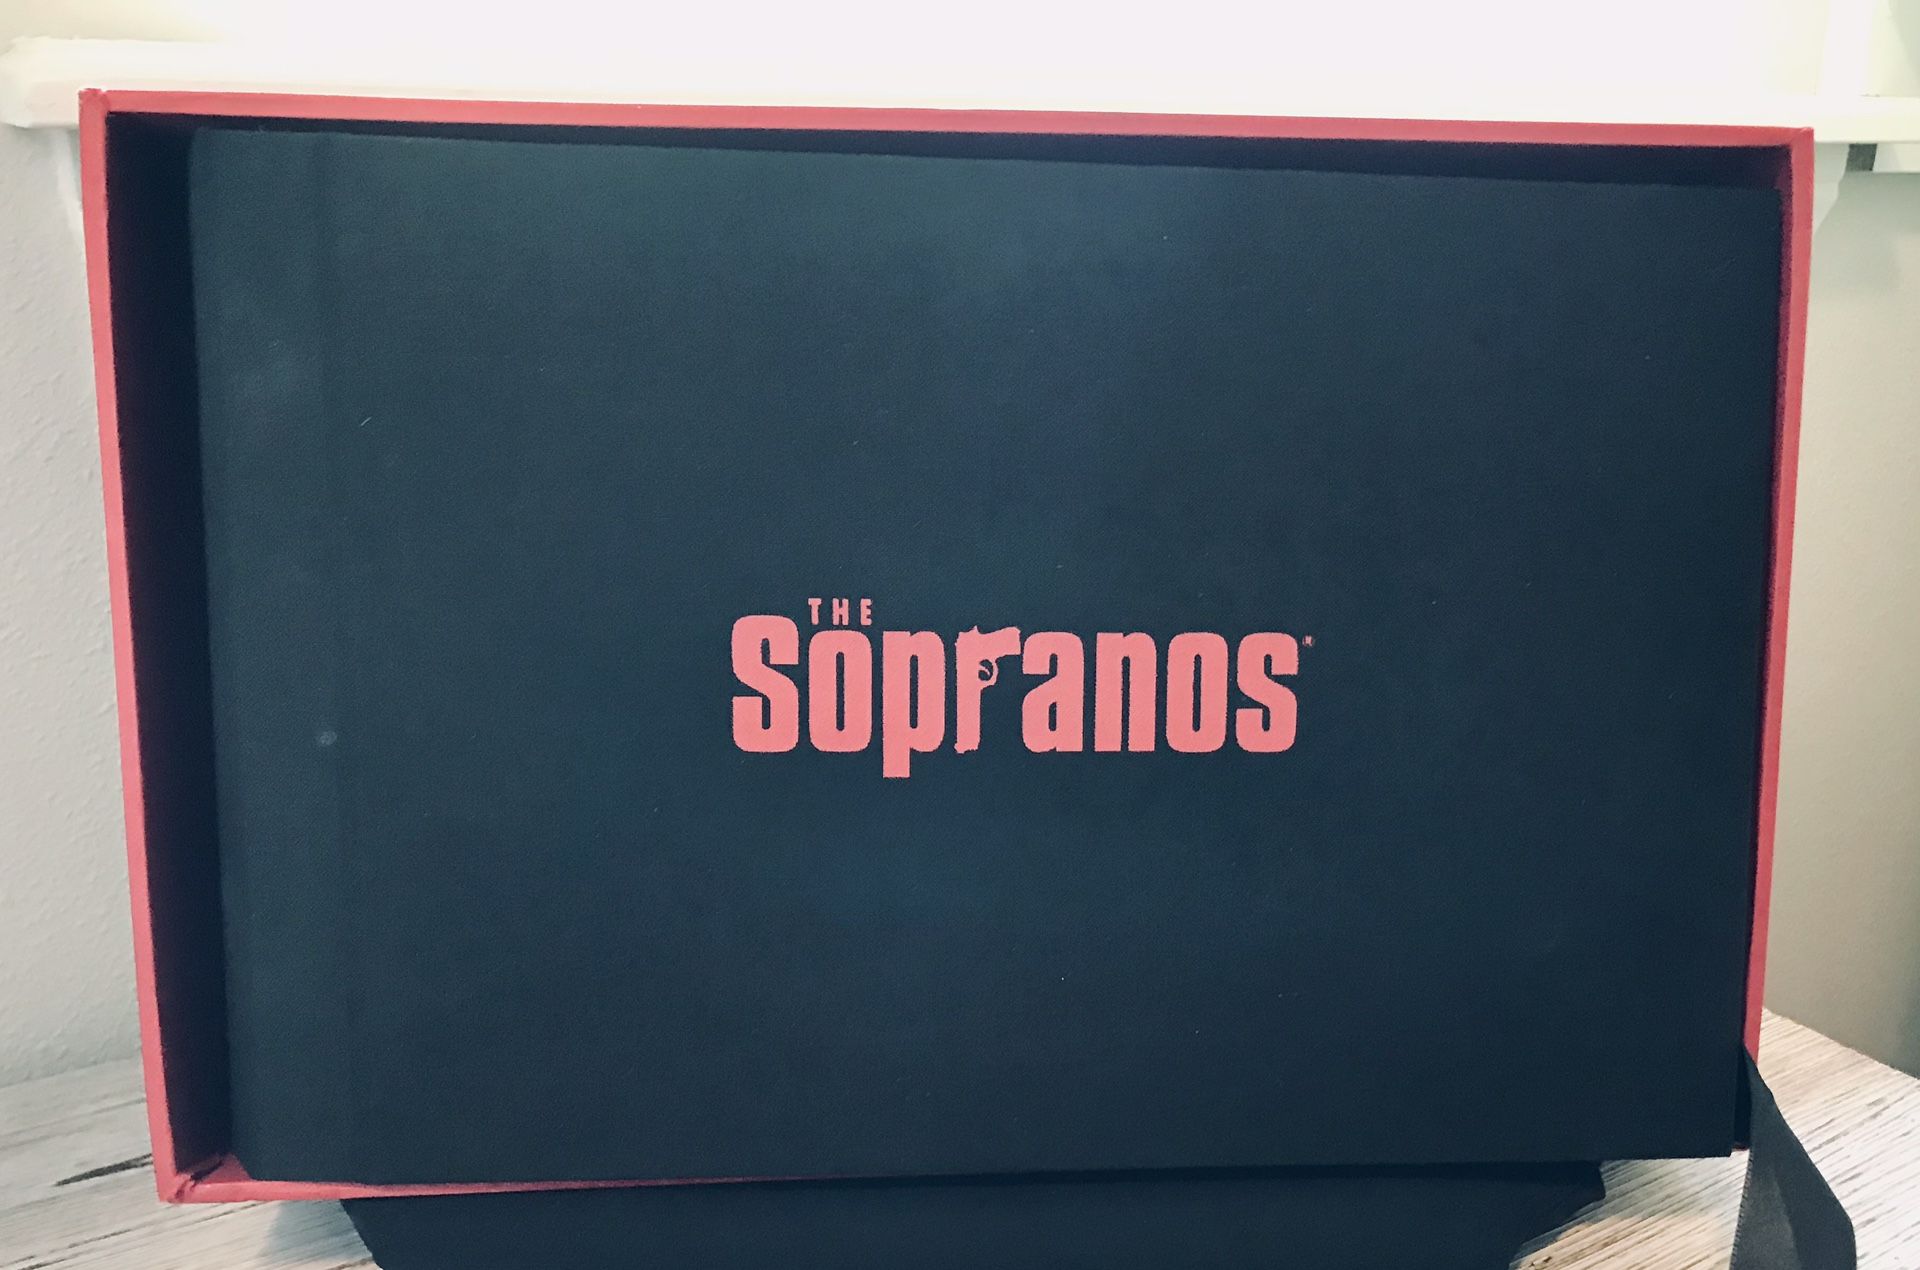 THE SOPRANOS COMPLETE SERIES COLLECTOR'S EDITION, SEASONS 1-6 DVD, 32 DISC SET (missing 1 Soundtrack Disc) Over 3 1/2 hours of Never-Before-Seen Featu